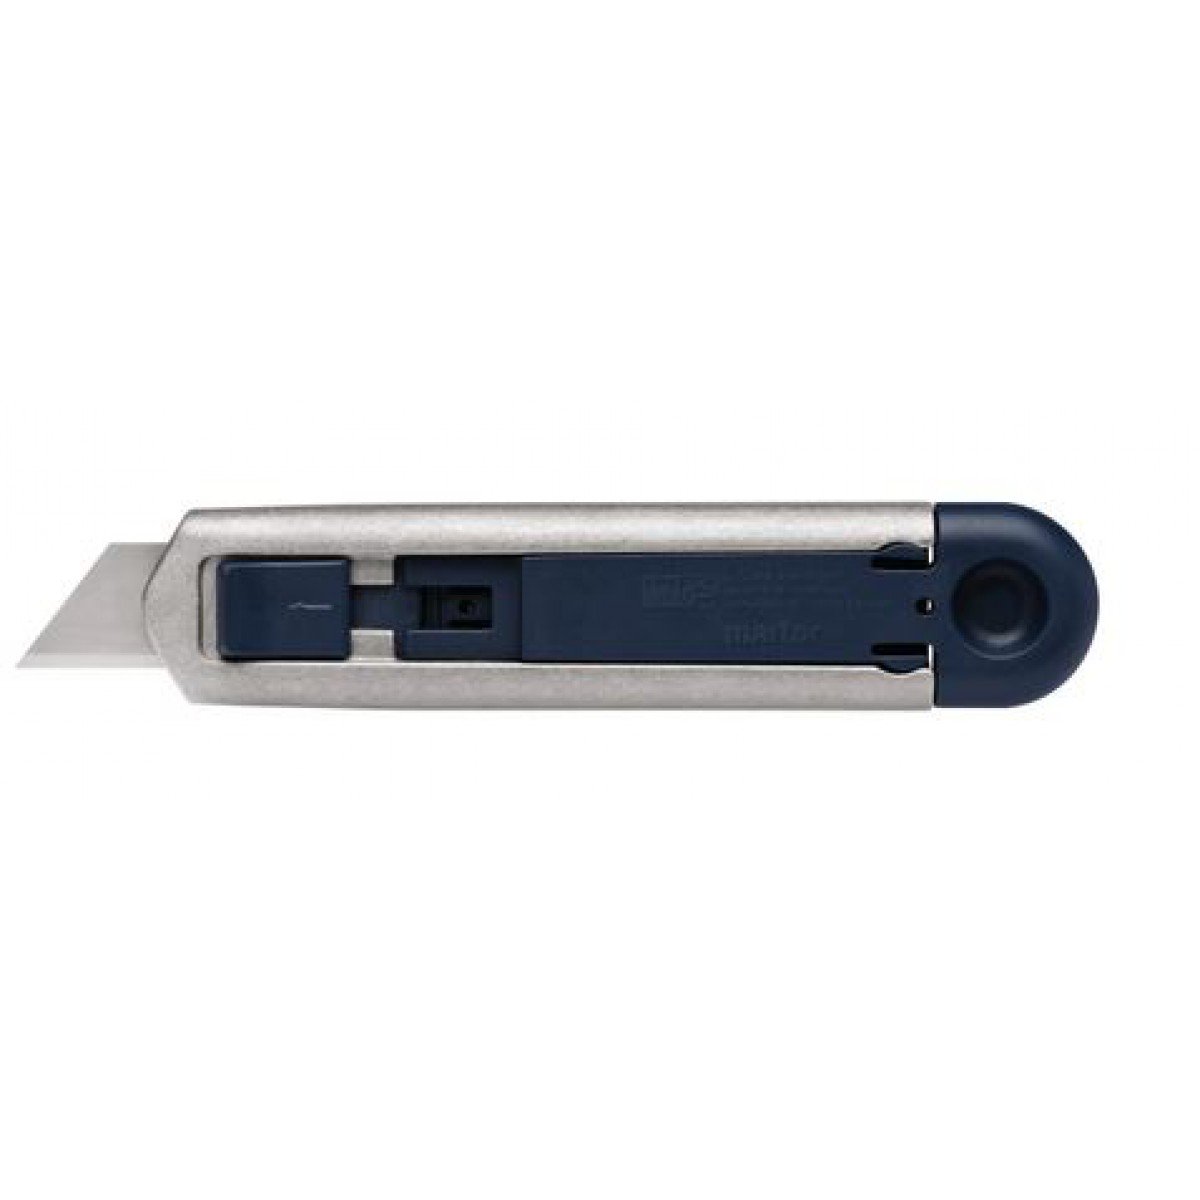 SECUNORM PROFI25 MDP Metal Detectable Safety Knife